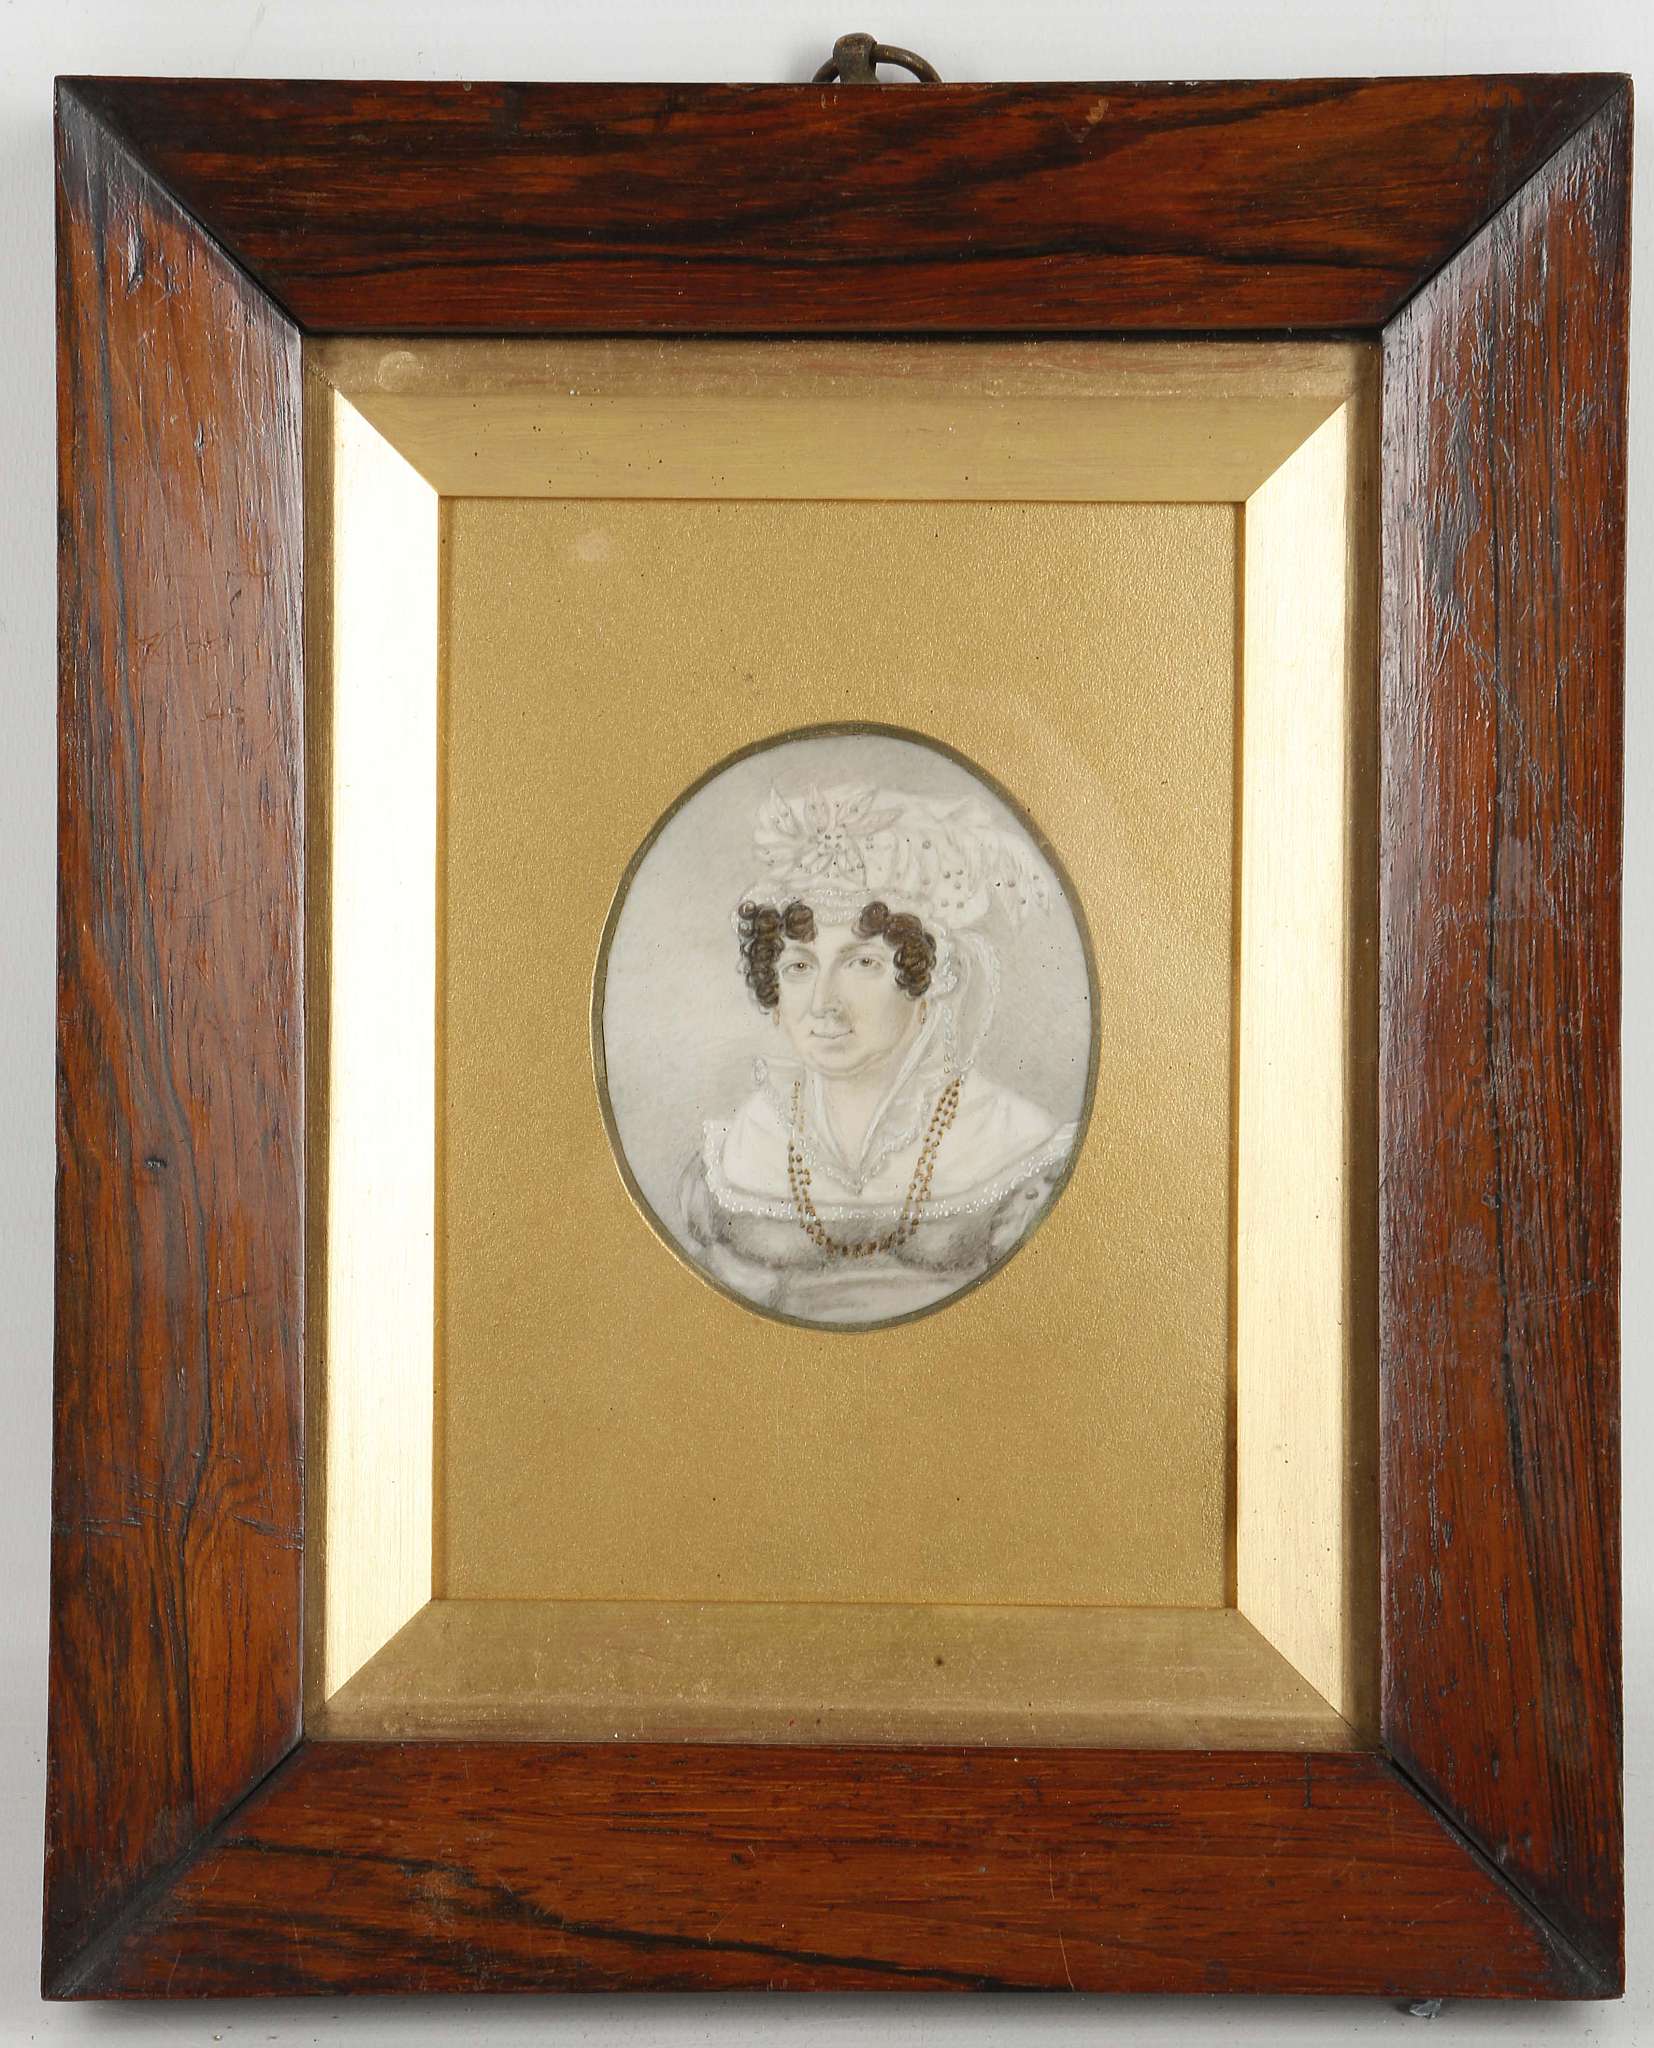 A mounted portrait miniature of a lady in grey dress with pearls.